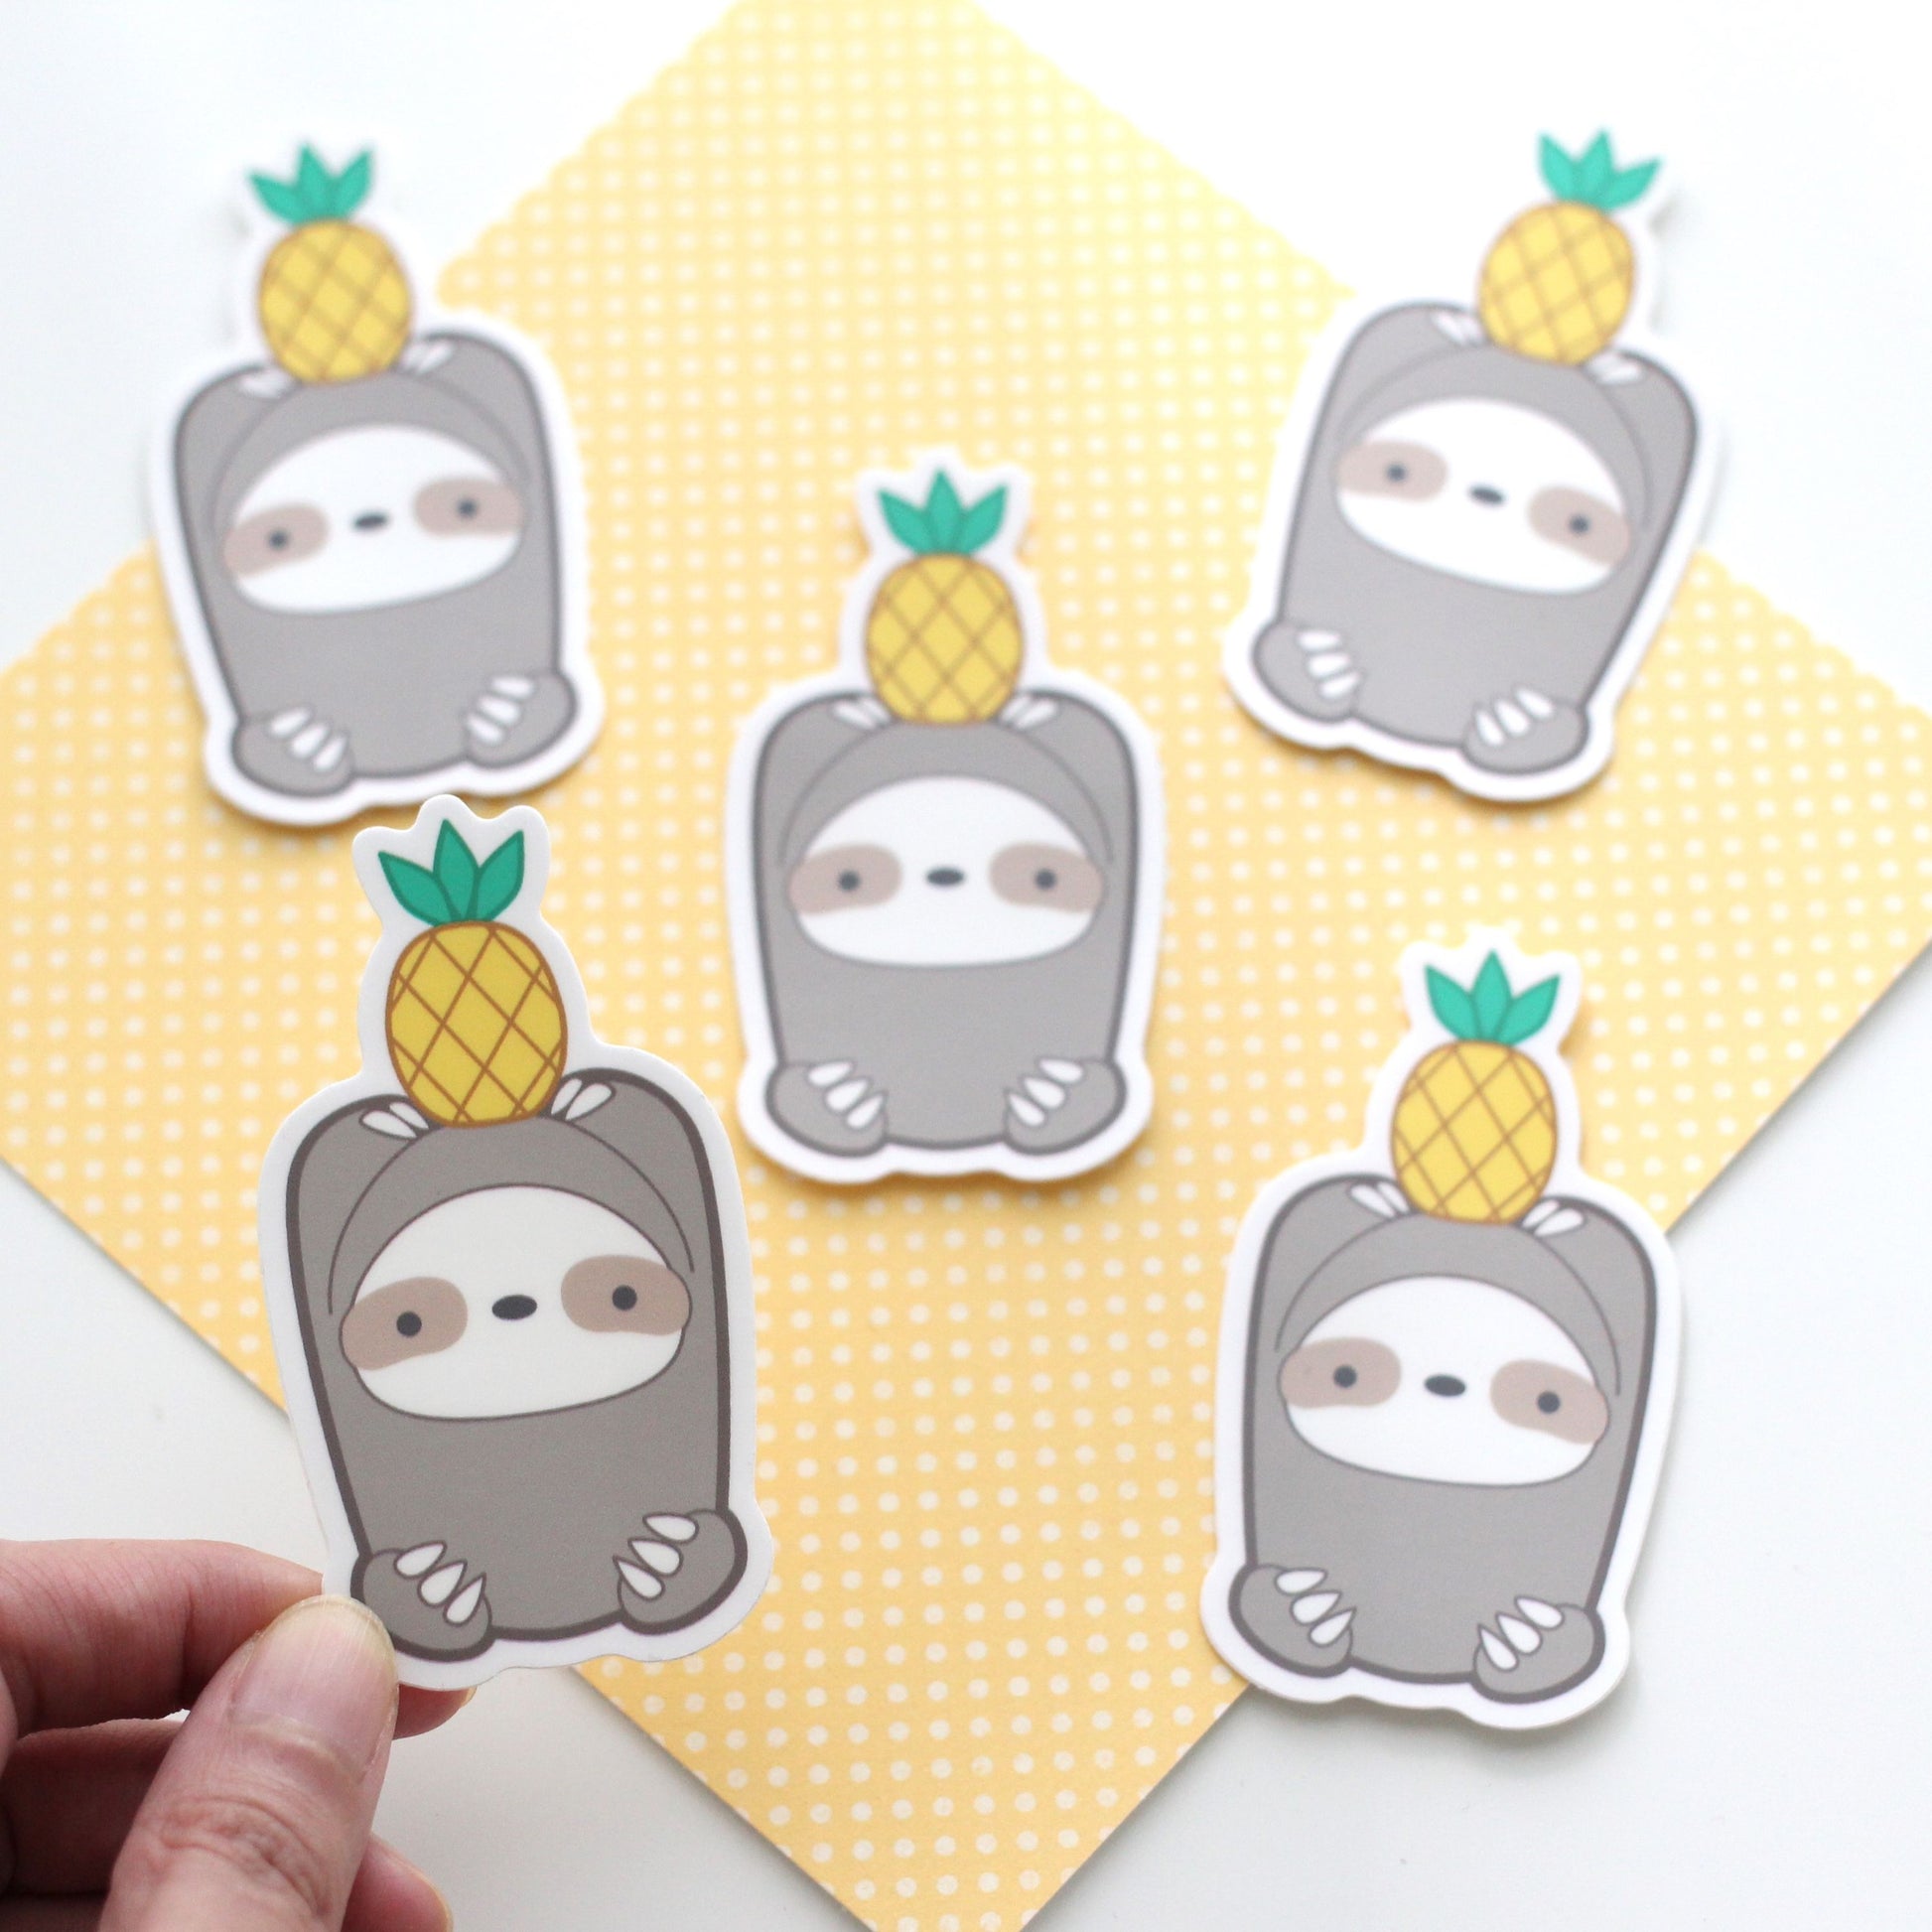 Pineapple Sloth Vinyl Sticker - Cute Sloth Decal - Sloth Stationery by Wild Whimsy Woolies